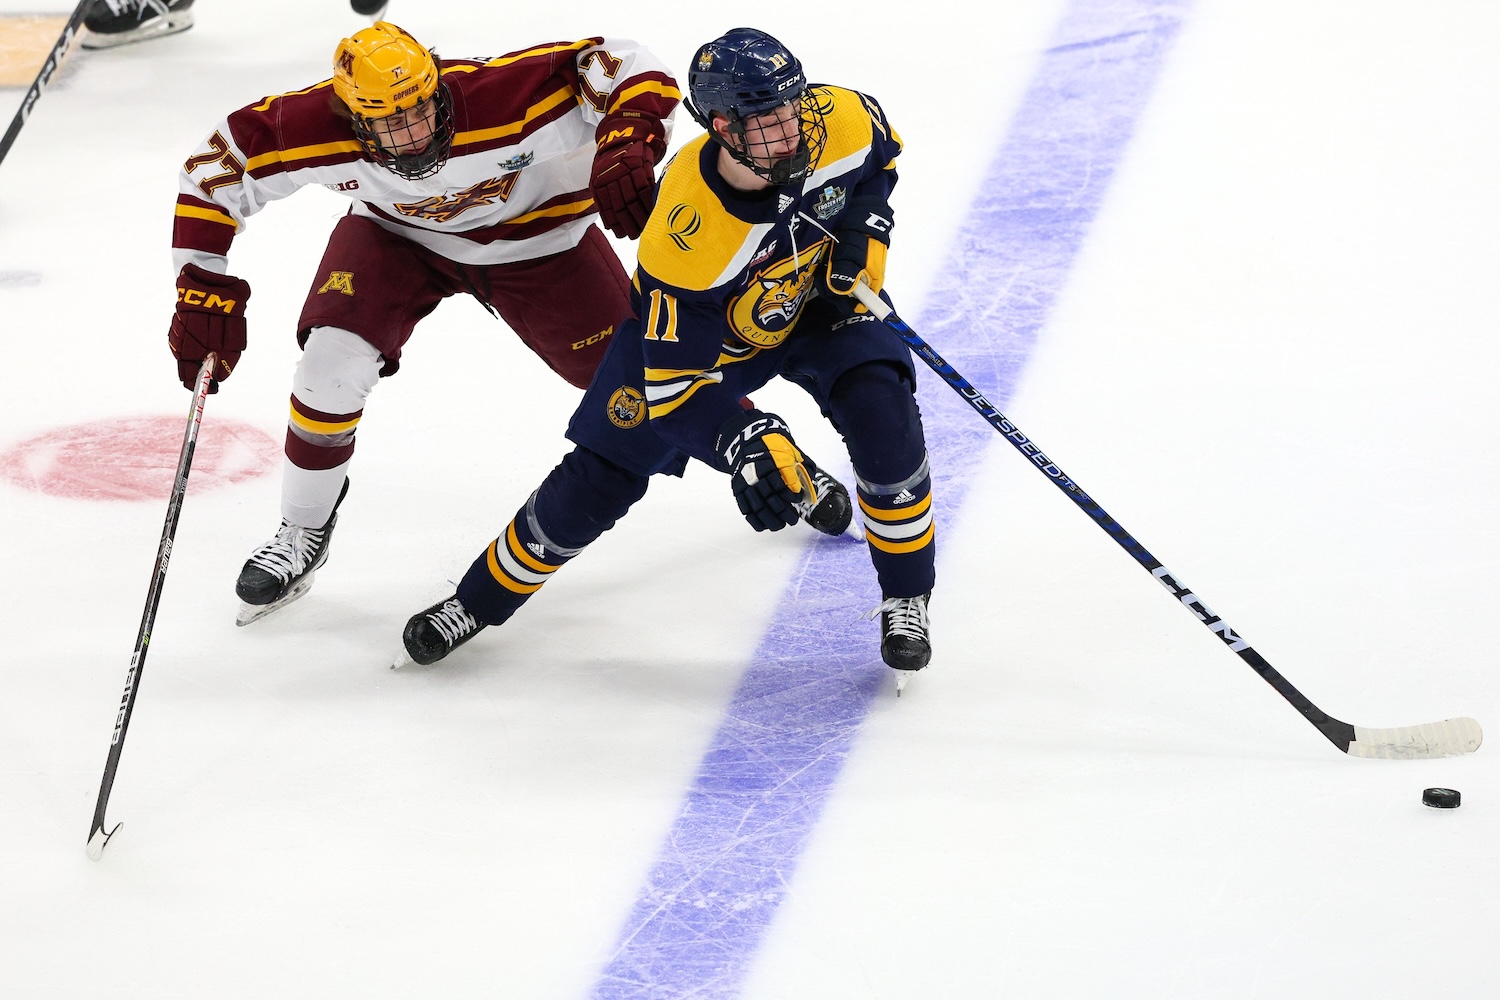 Apr 8, 2023; Tampa, Florida, USA; Quinnipiac forward Collin Graf (11) controls the puck from Minnesota forward Rhett Pitlick (77) in the first period during the national championship game of the 2023 Frozen Four college ice hockey tournament at Amalie Arena. Mandatory Credit: Nathan Ray Seebeck-USA TODAY Sports